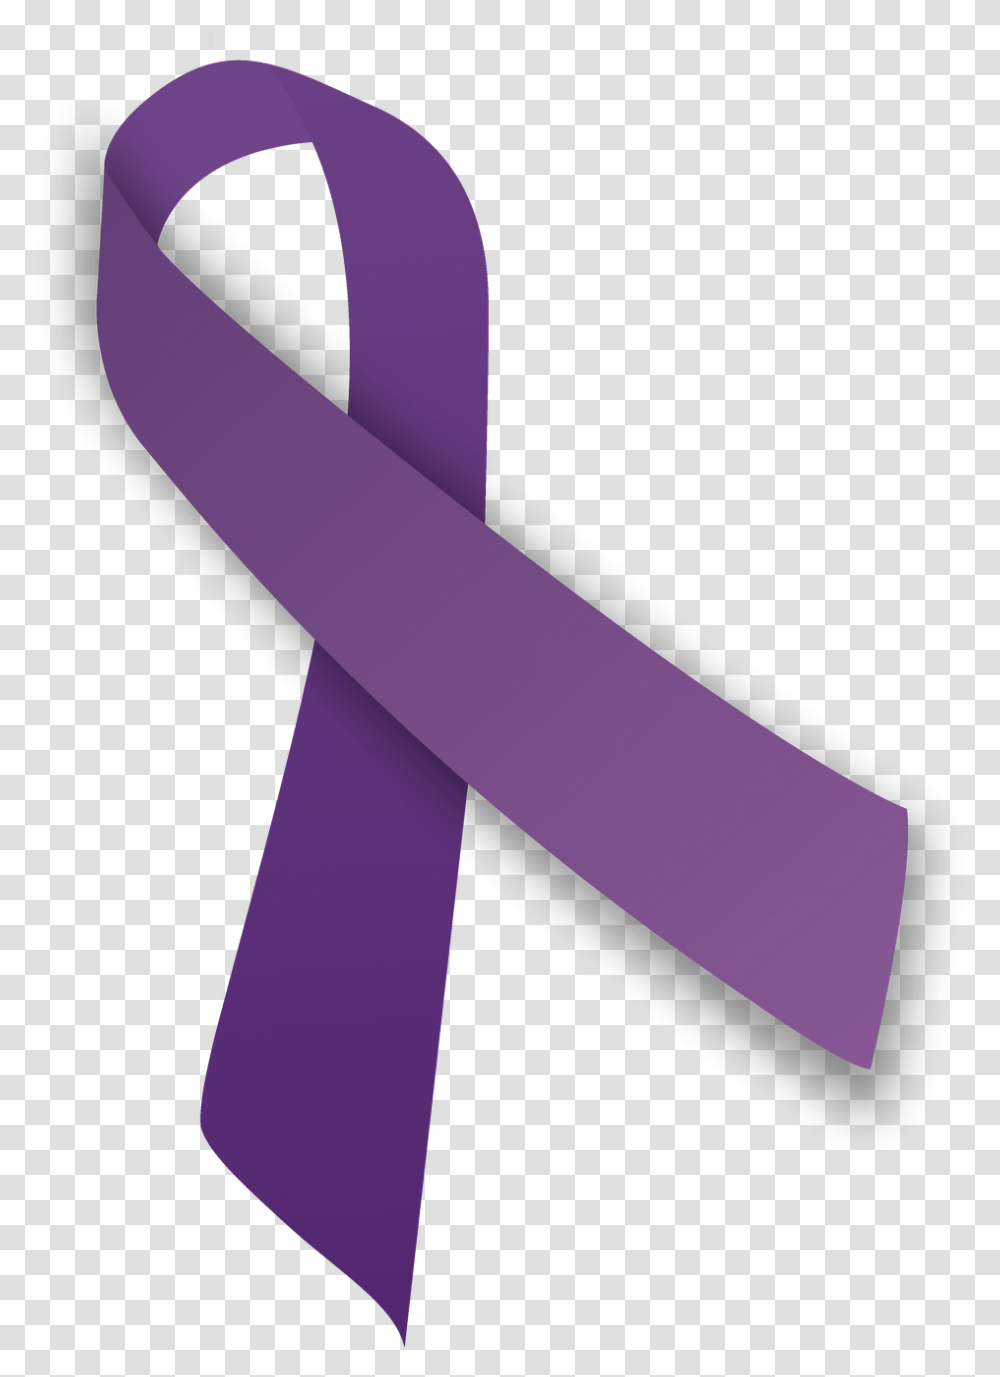 Ehealth In Pain Management And Patient Support Domestic Abuse Ribbon, Purple, Sash Transparent Png